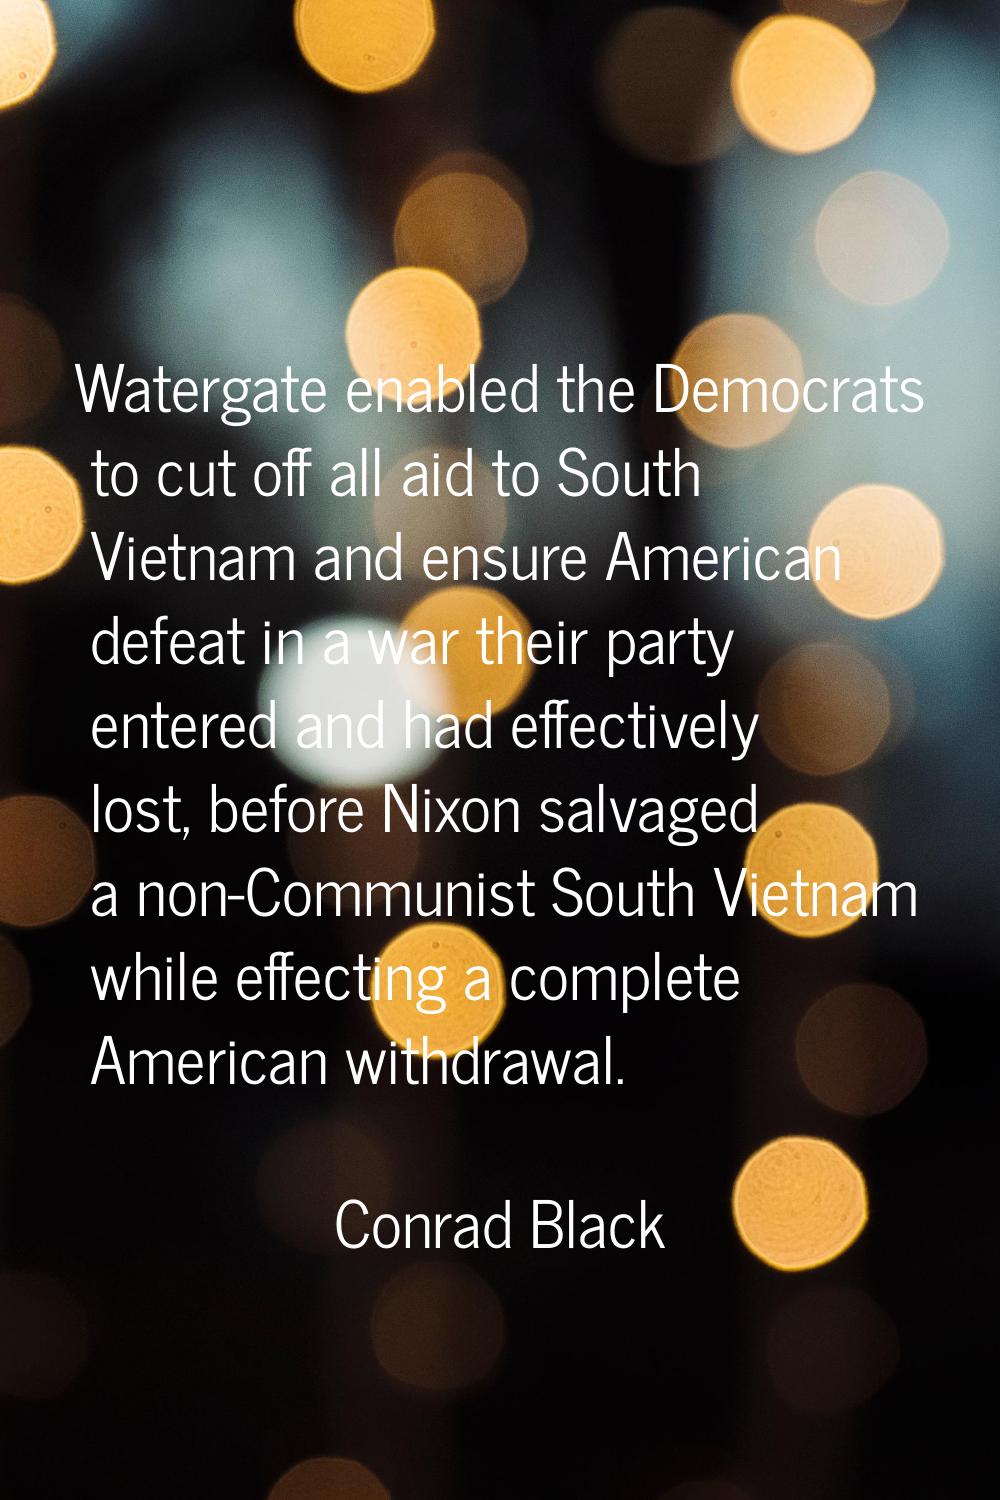 Watergate enabled the Democrats to cut off all aid to South Vietnam and ensure American defeat in a